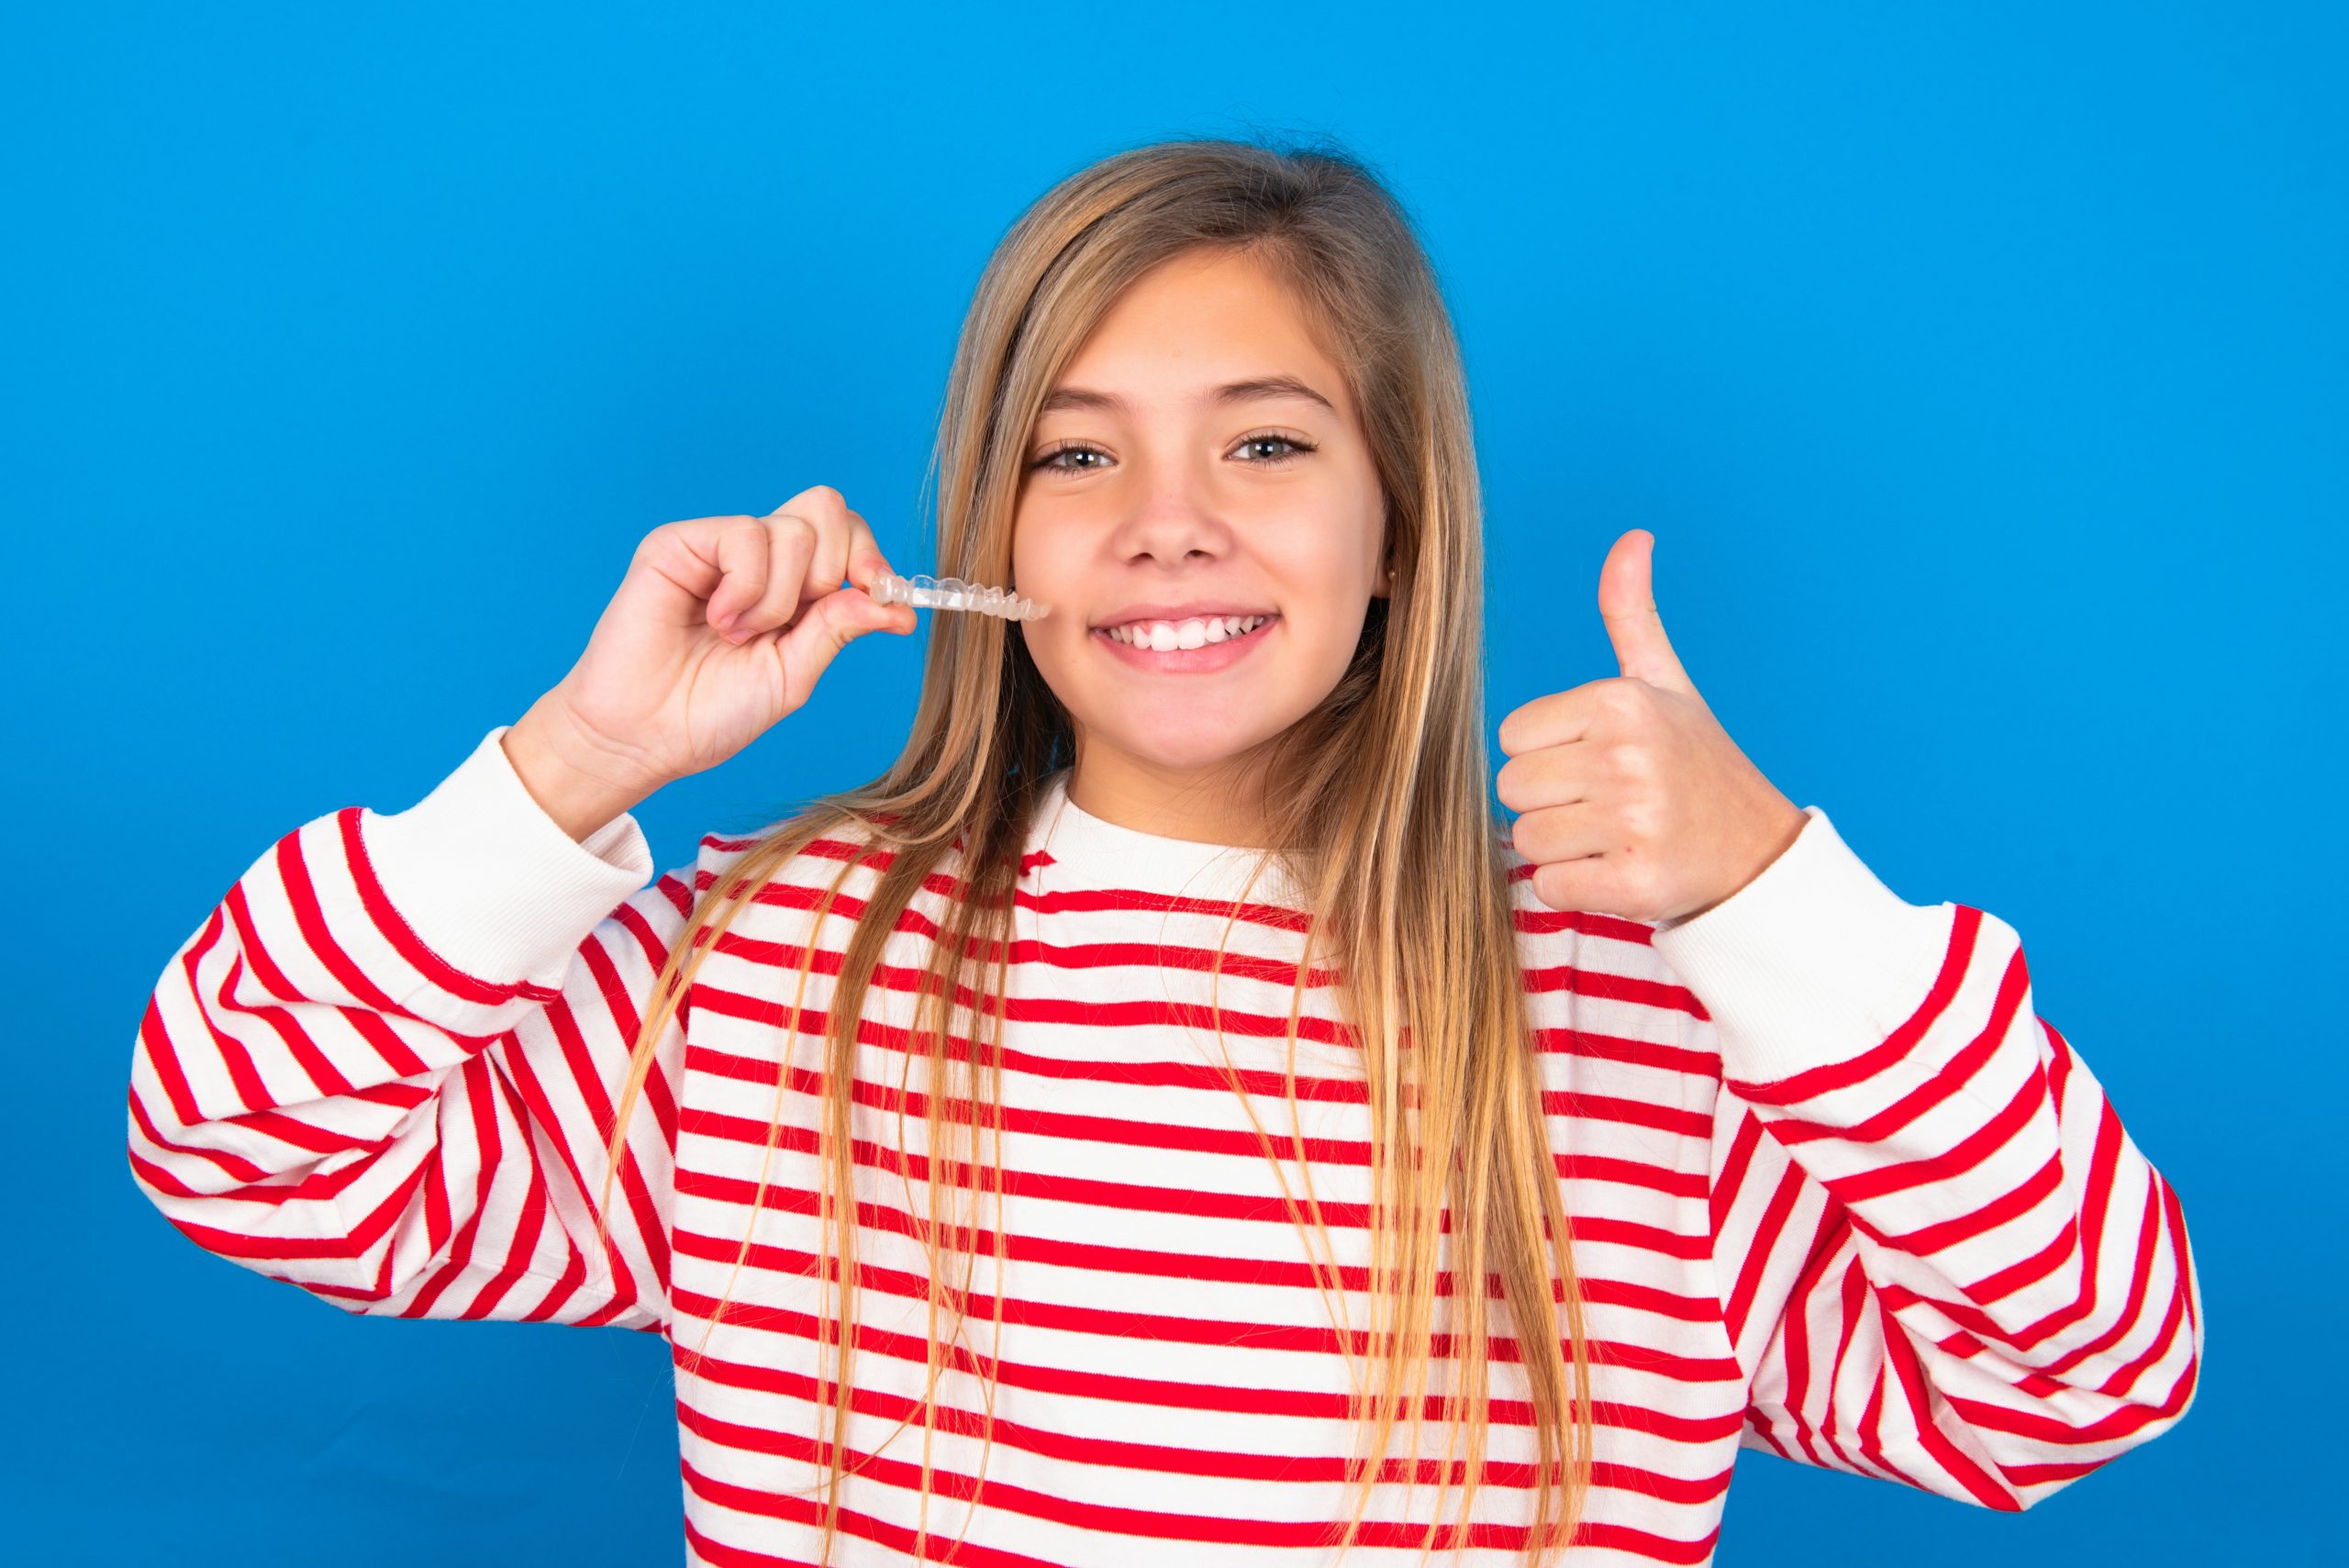 Caucasian Teen Girl Wearing Striped Shirt Over Blue Studio Background Holding An Invisible Braces Aligner And Rising Thumb Up, Recommending This New Treatment. Dental Healthcare Concept.